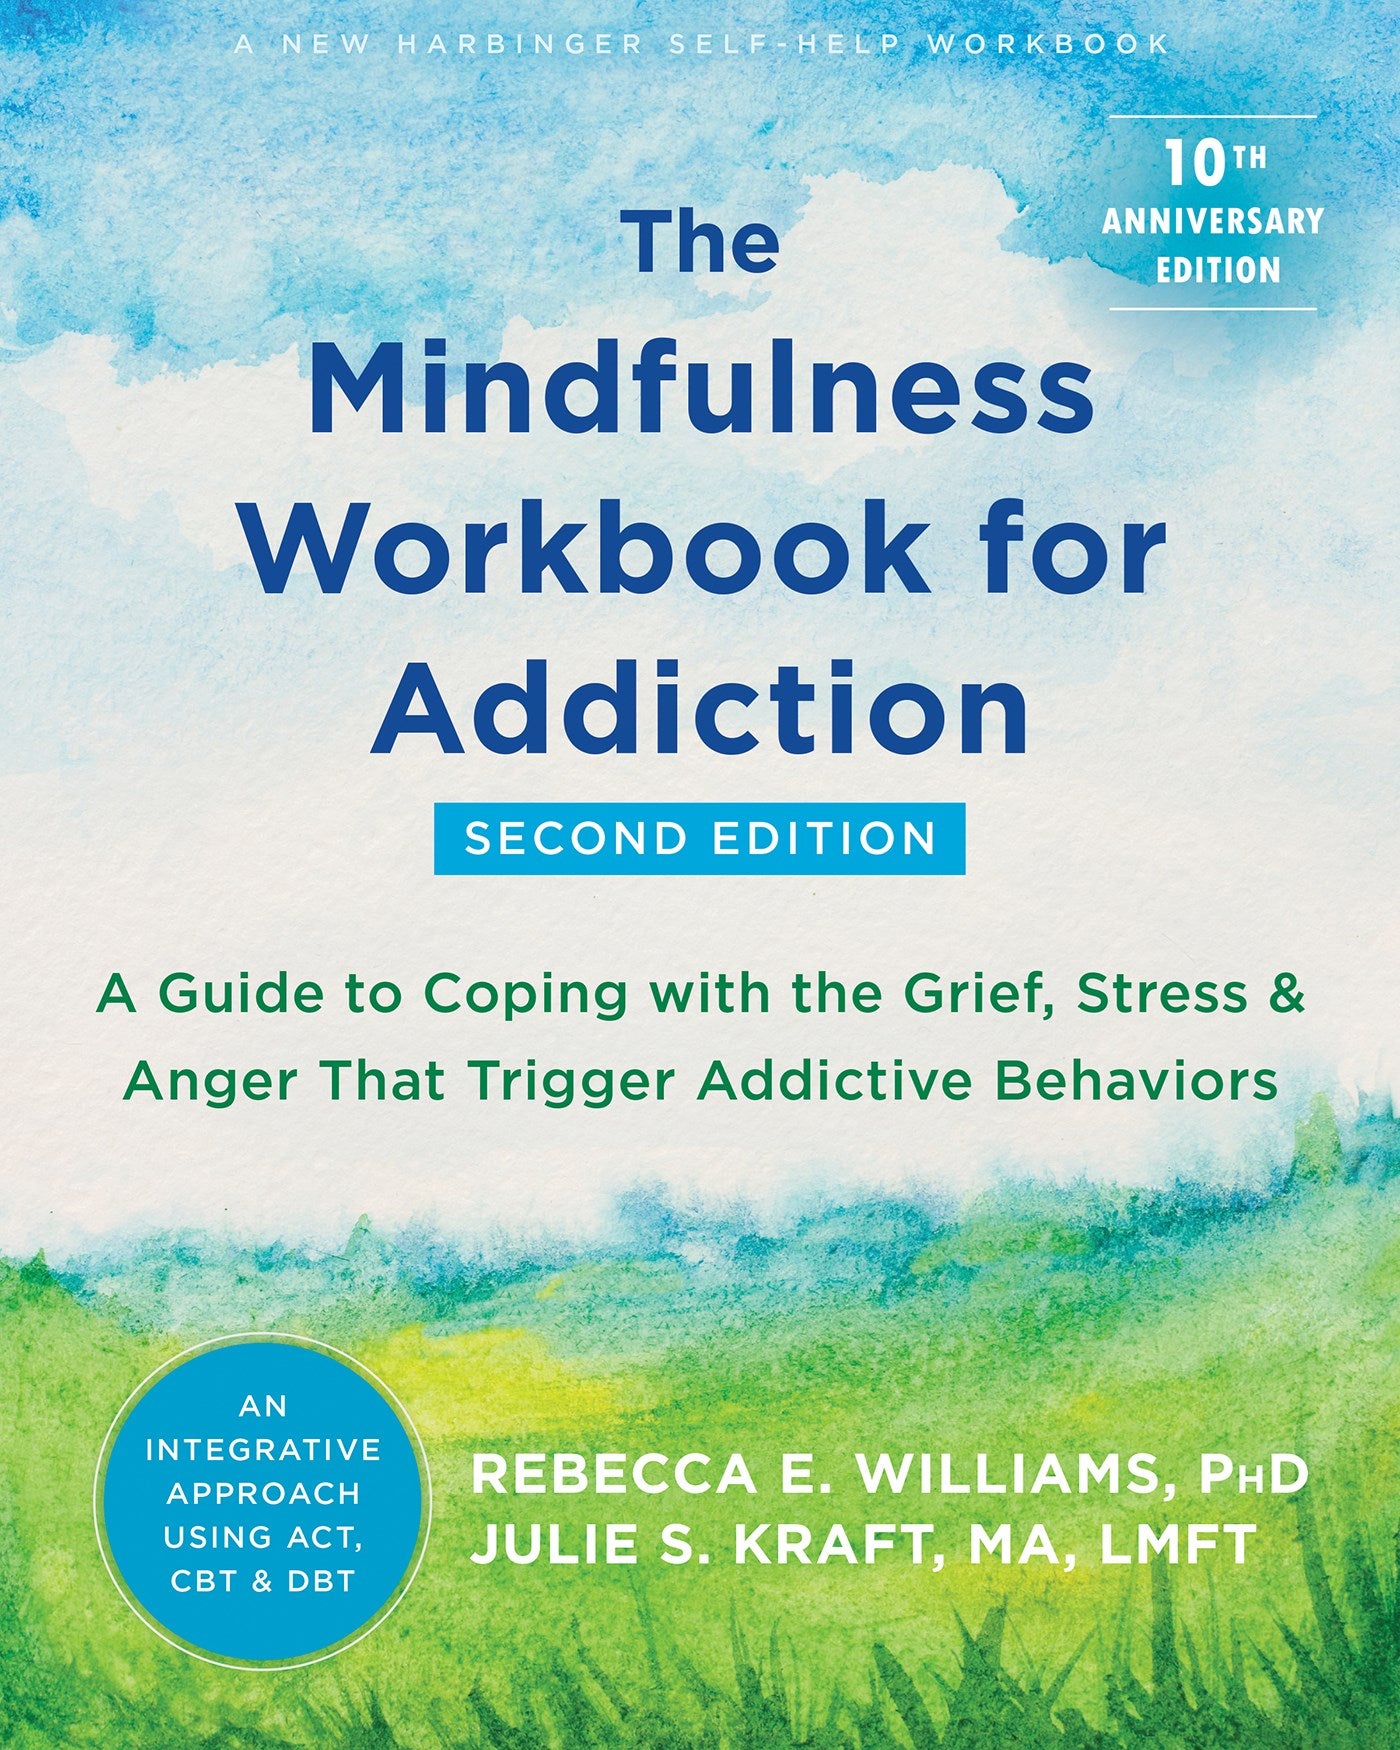 The Mindfulness Workbook for Addiction: A Guide to Coping with the Grief, Stress, and Anger That Trigger Addictive Behaviors (2nd Edition, Revised)